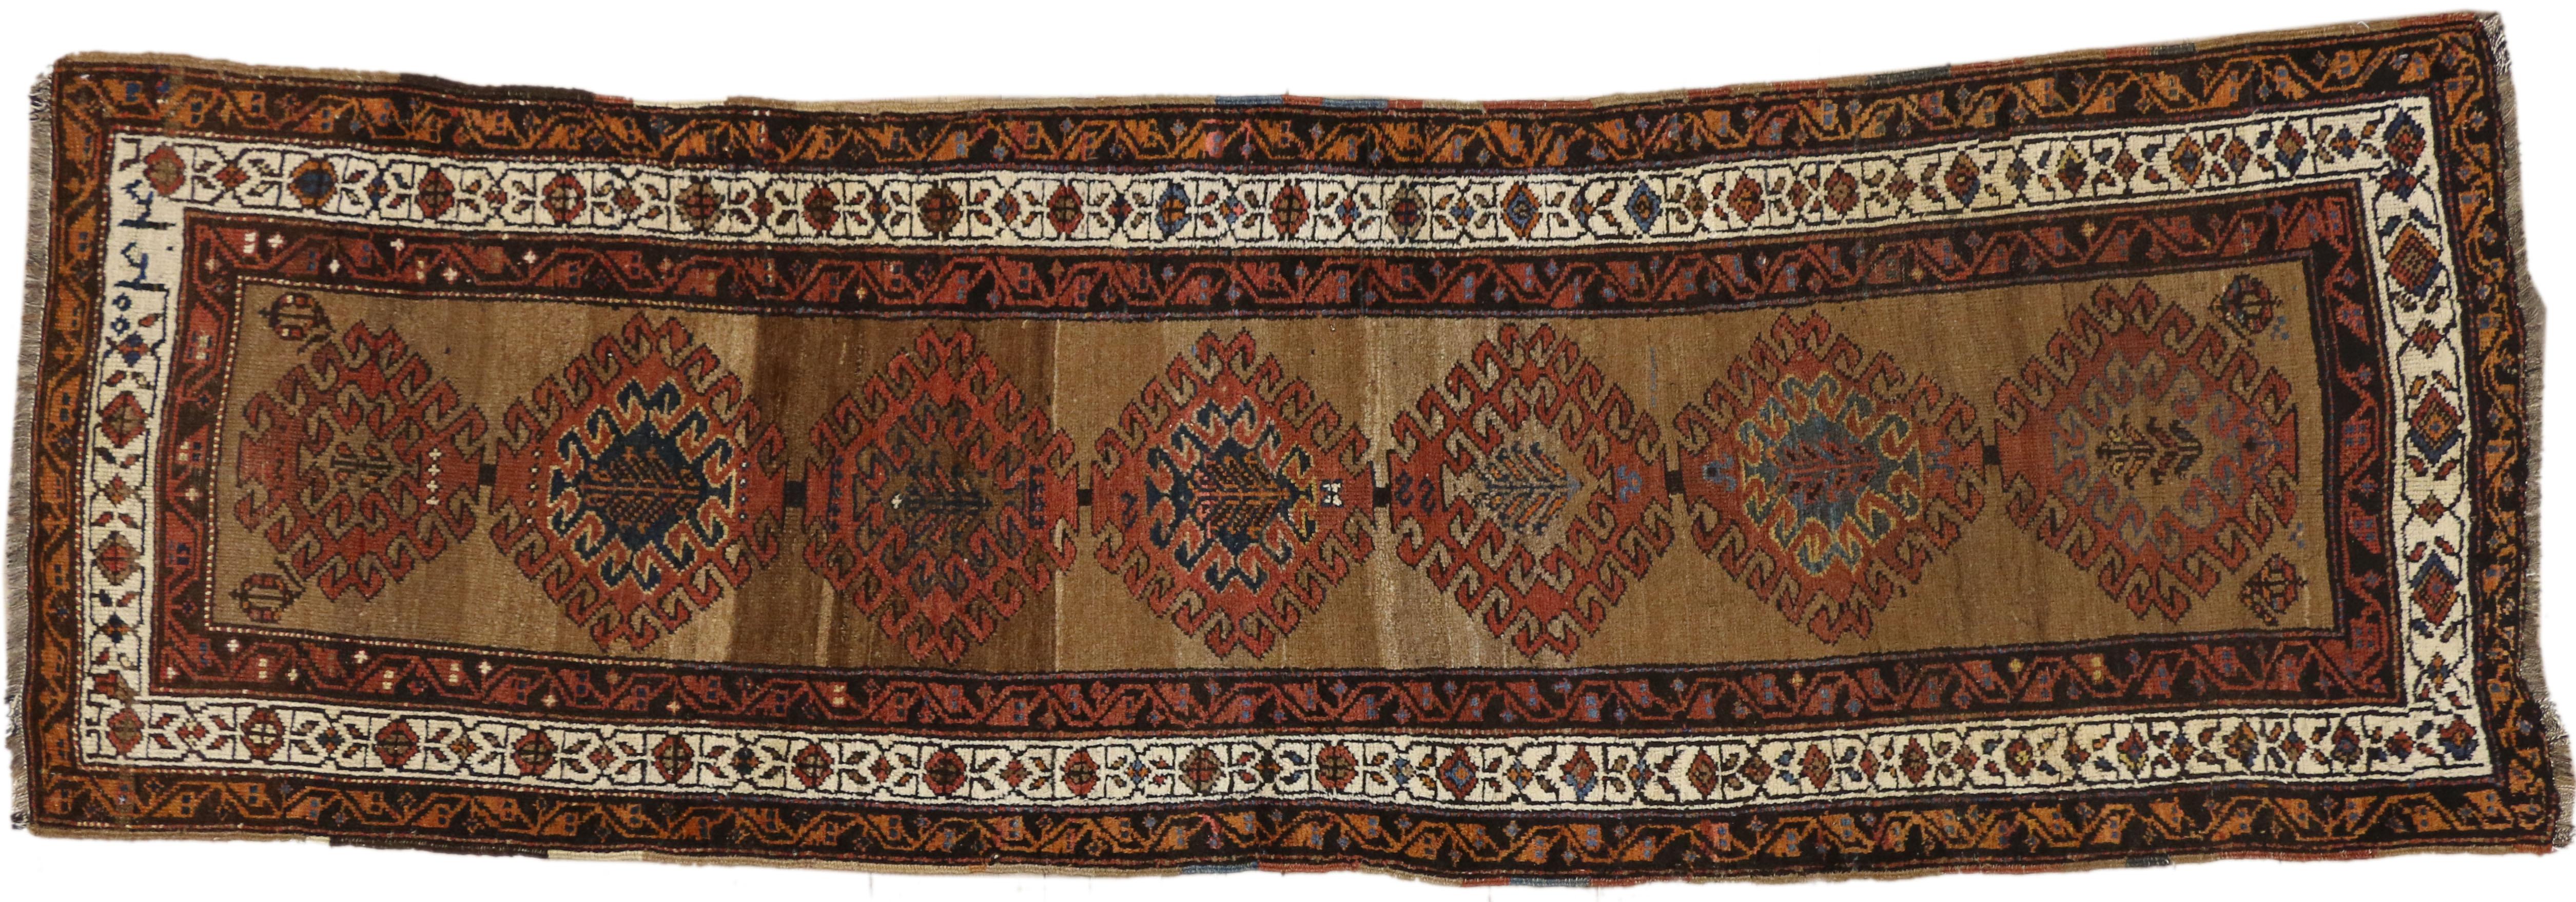 73180 Antique Malayer Persian Runner with Warm Artisan and Mid-Century Modern Style. This hand-knotted wool and camel hair antique Persian Malayer runner beautifully displays a Mid-Century Modern style with warm artisan vibes. Based on traditional